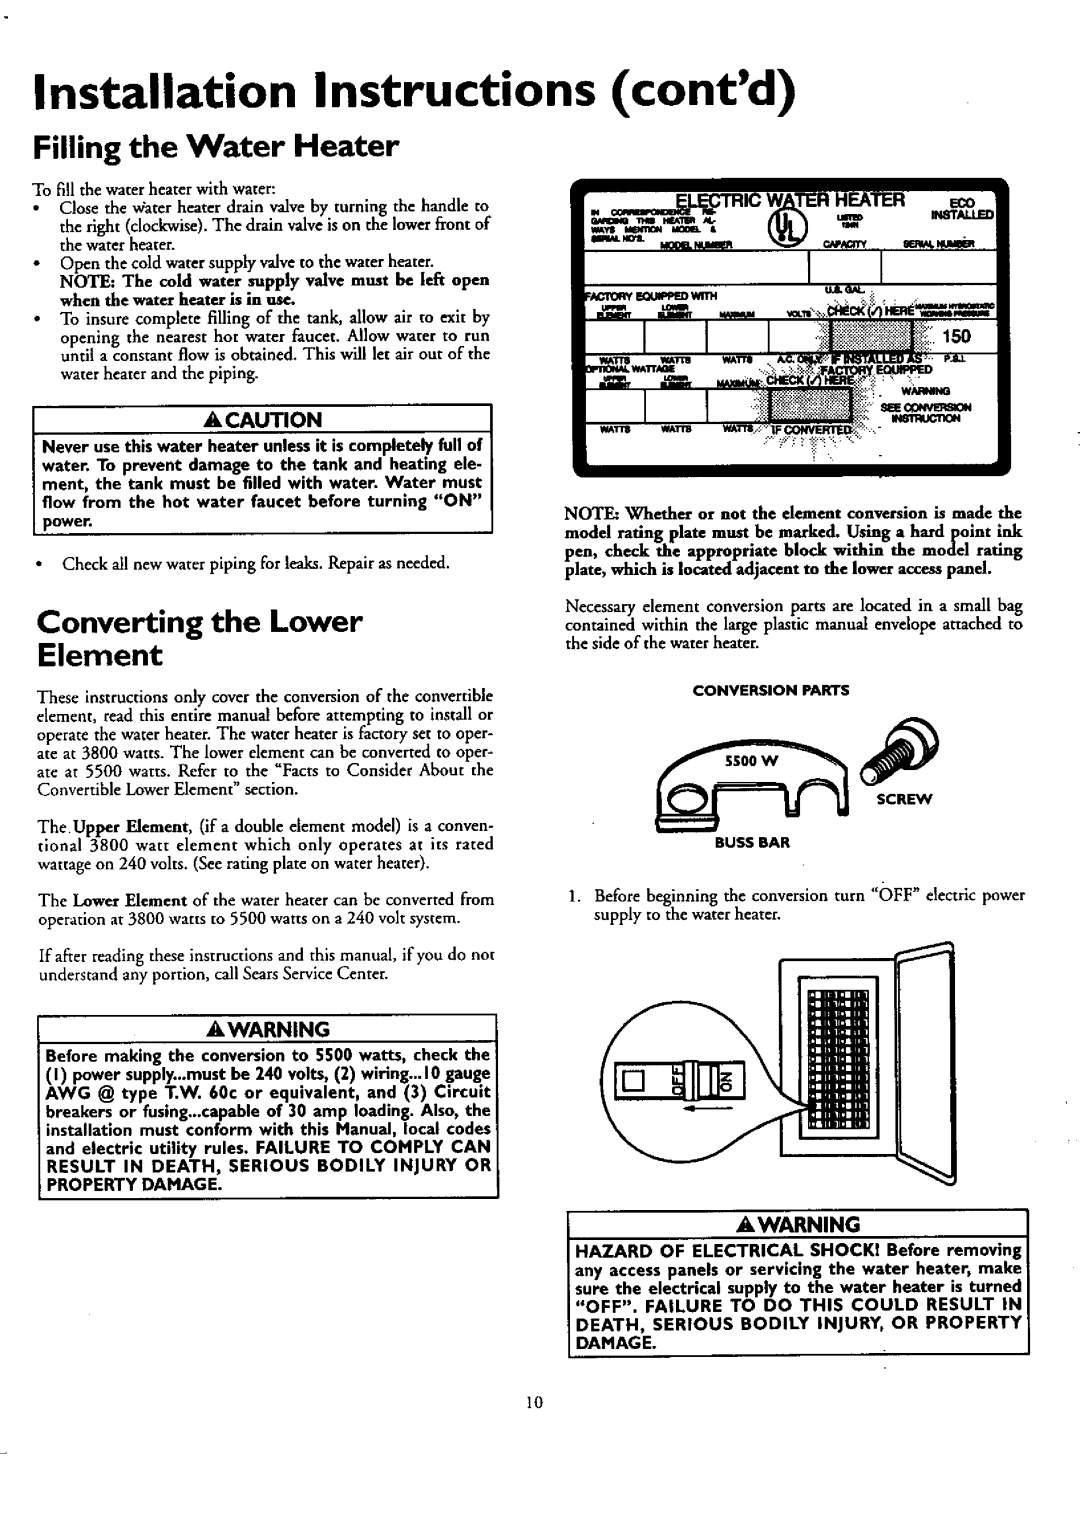 Kenmore 153.37.0391HT 30 GAL Installation Instructions contd, Filling the Water Heater, Converting the Lower Element 